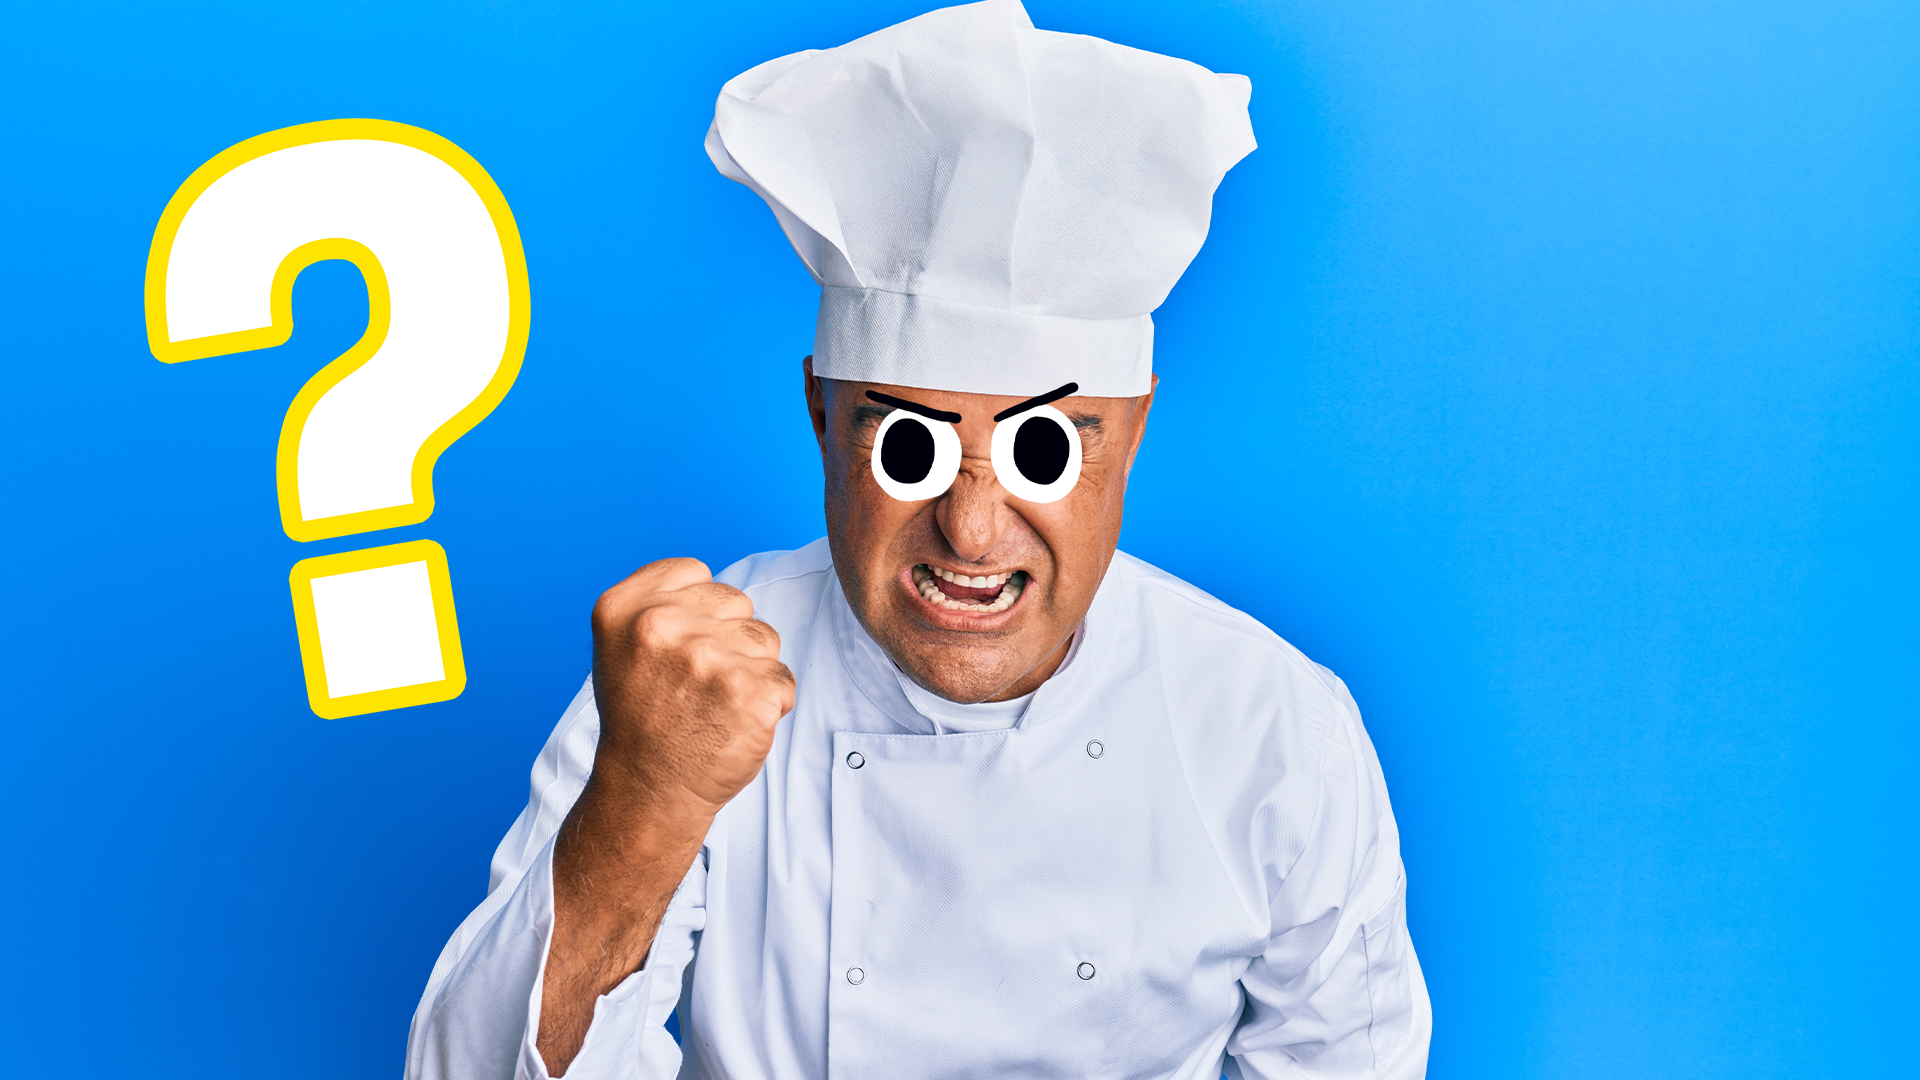 Angry chef on blue background with question mark